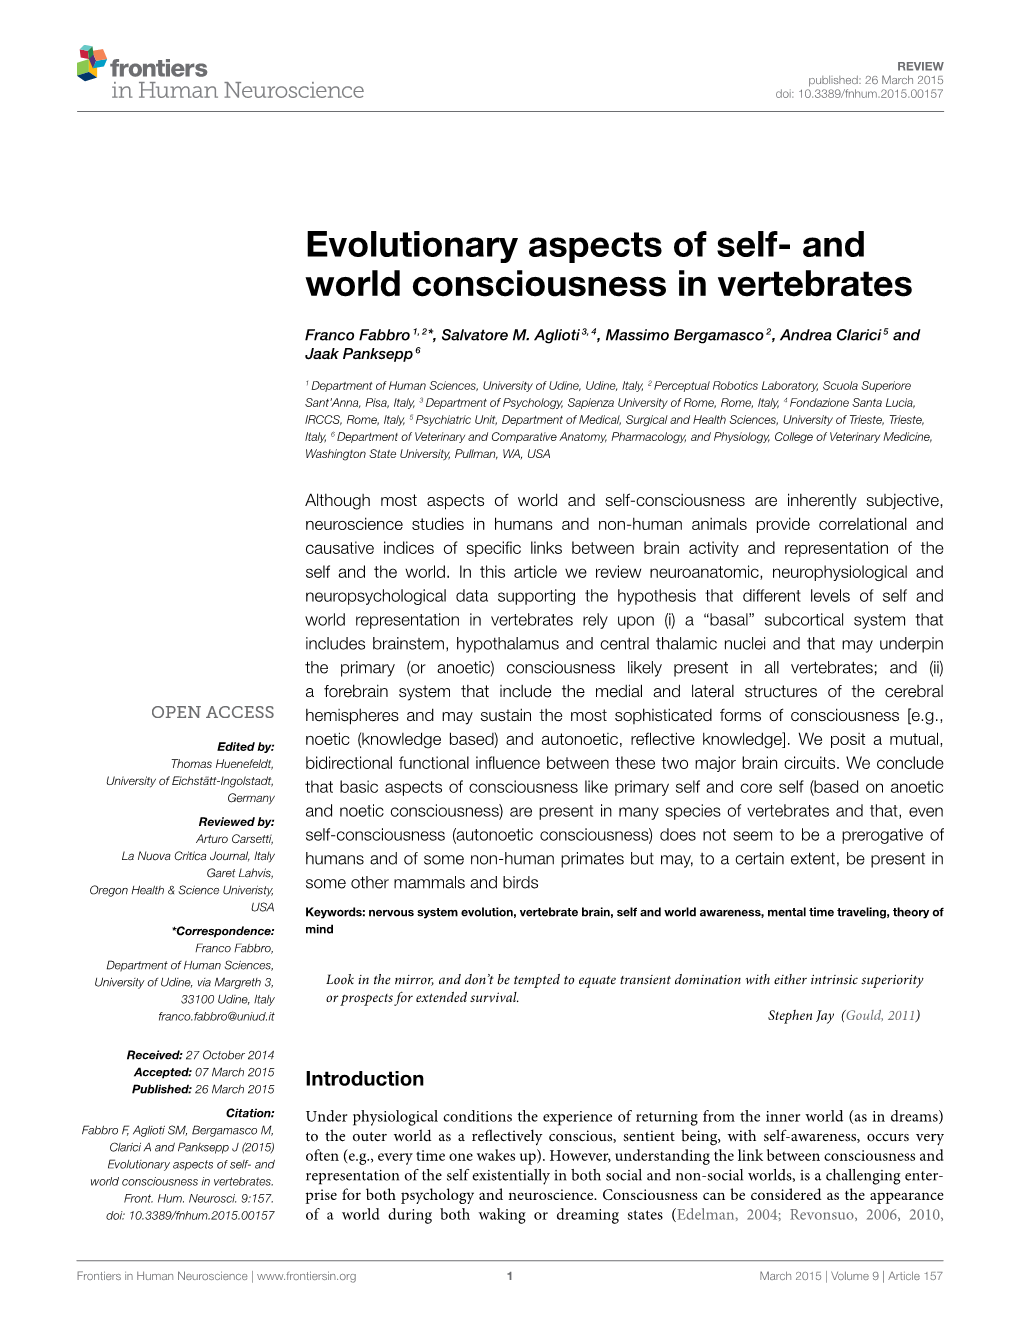 Evolutionary Aspects of Self- and World Consciousness in Vertebrates